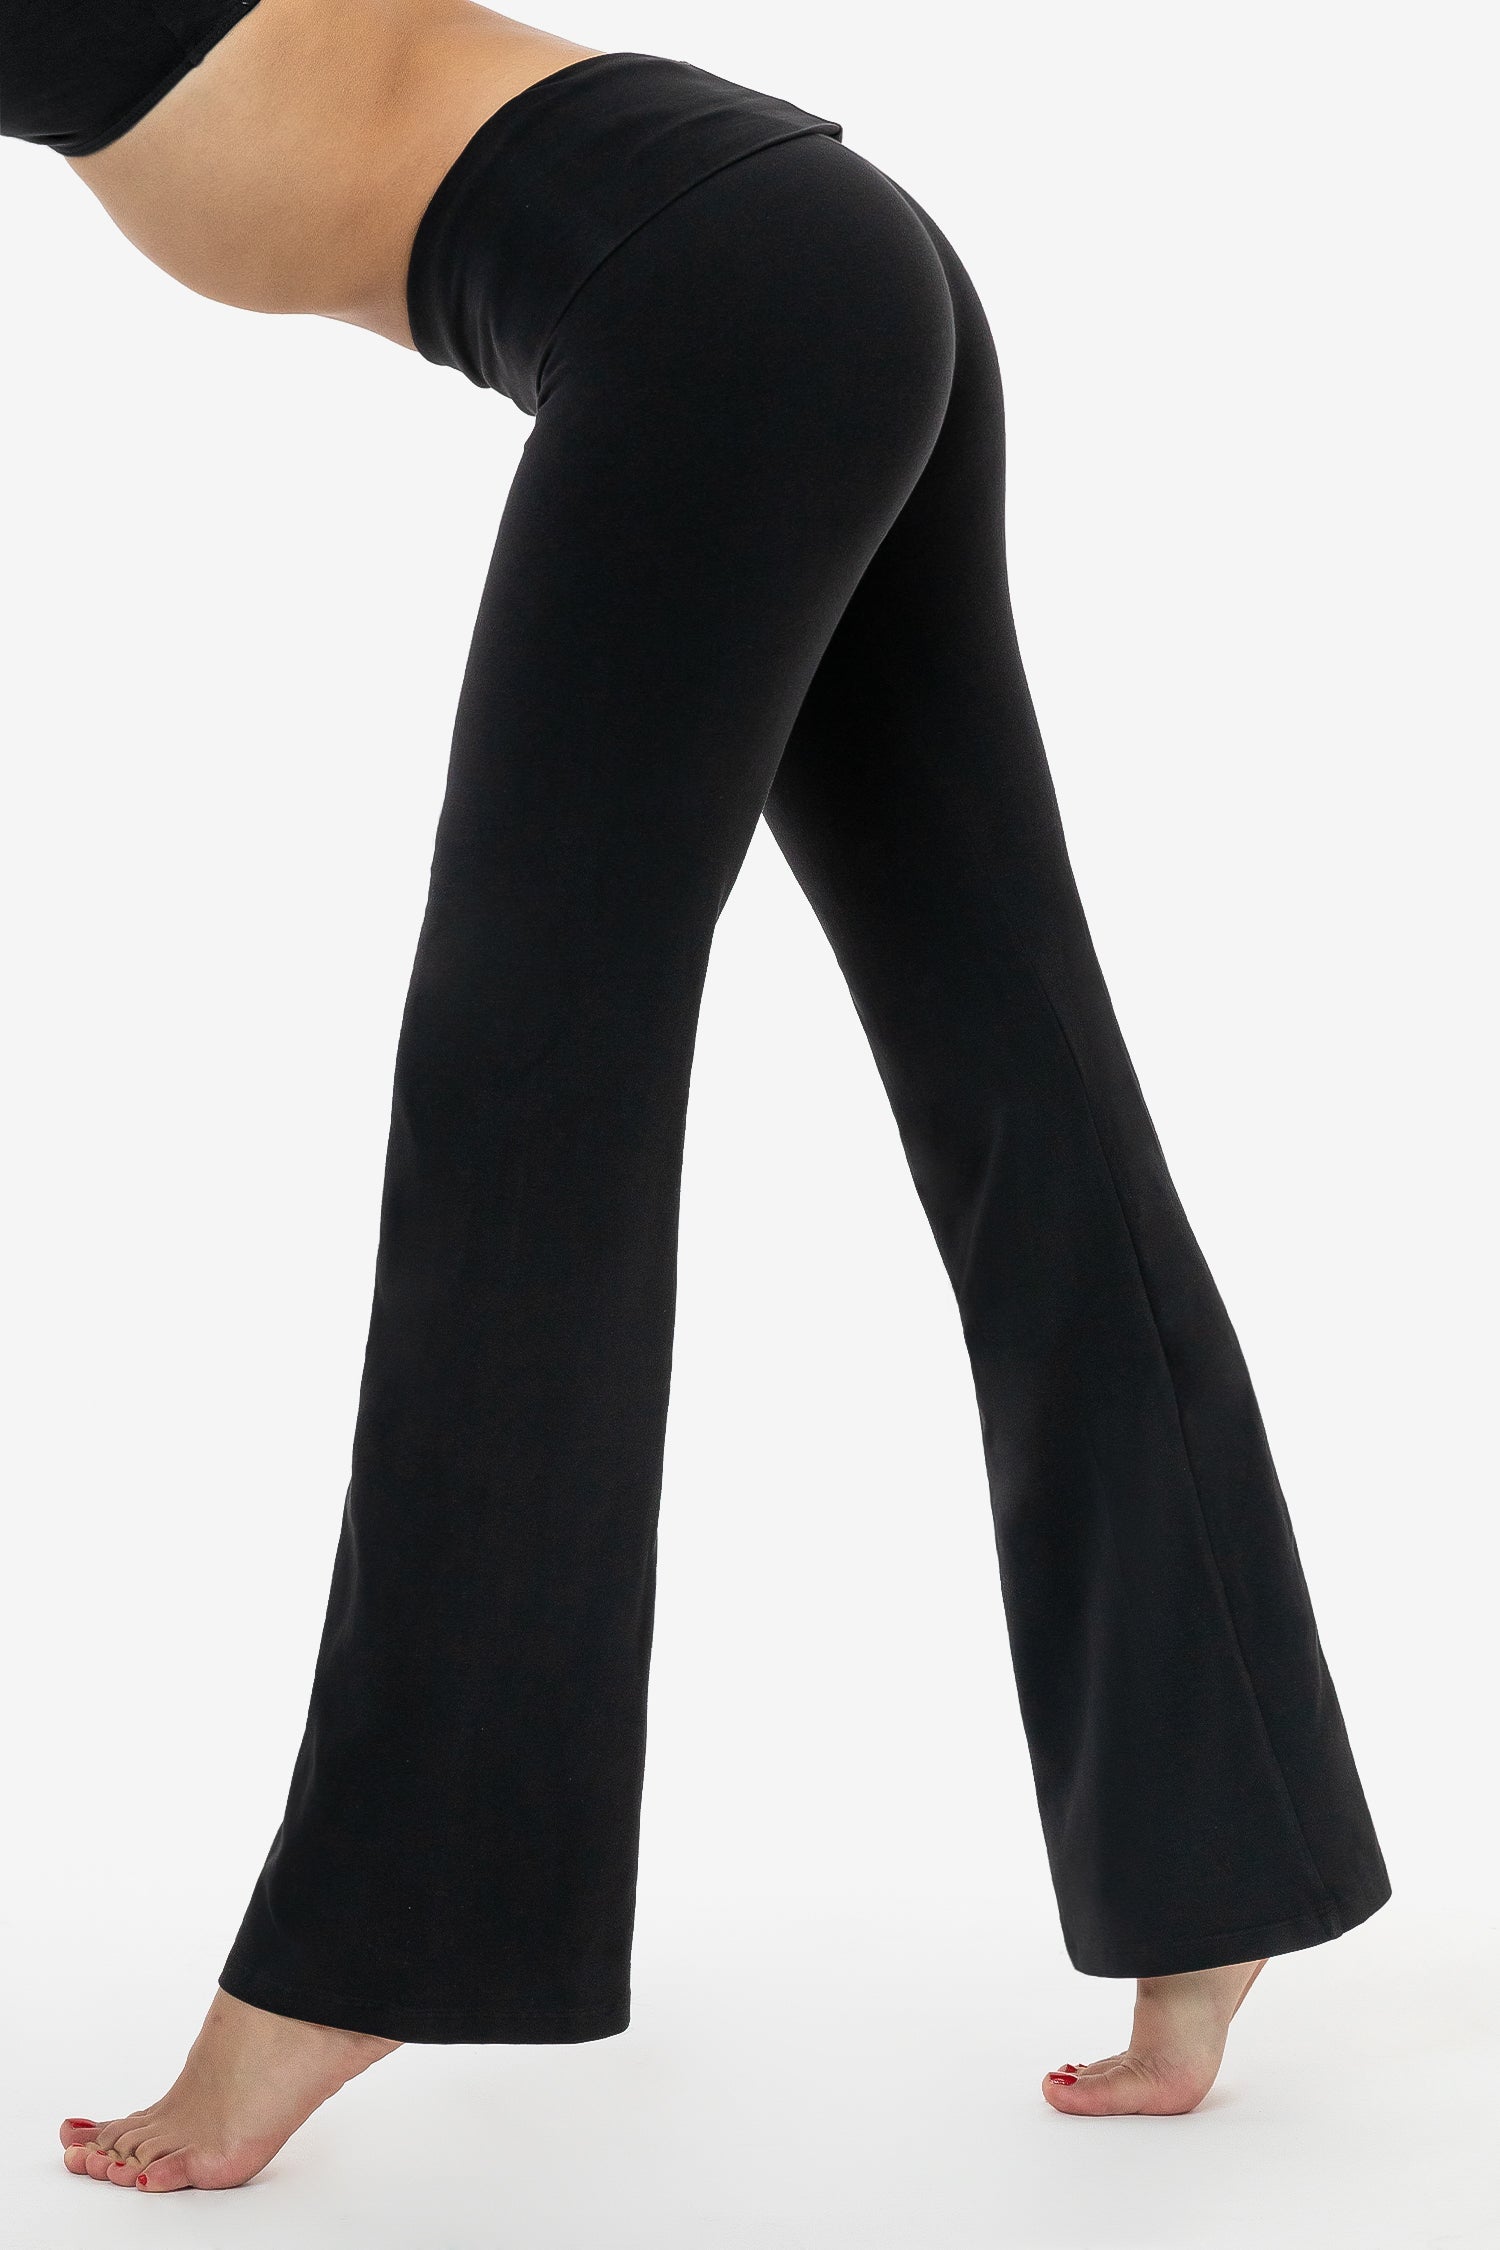 Clothes we love- Hard Tail yoga pant